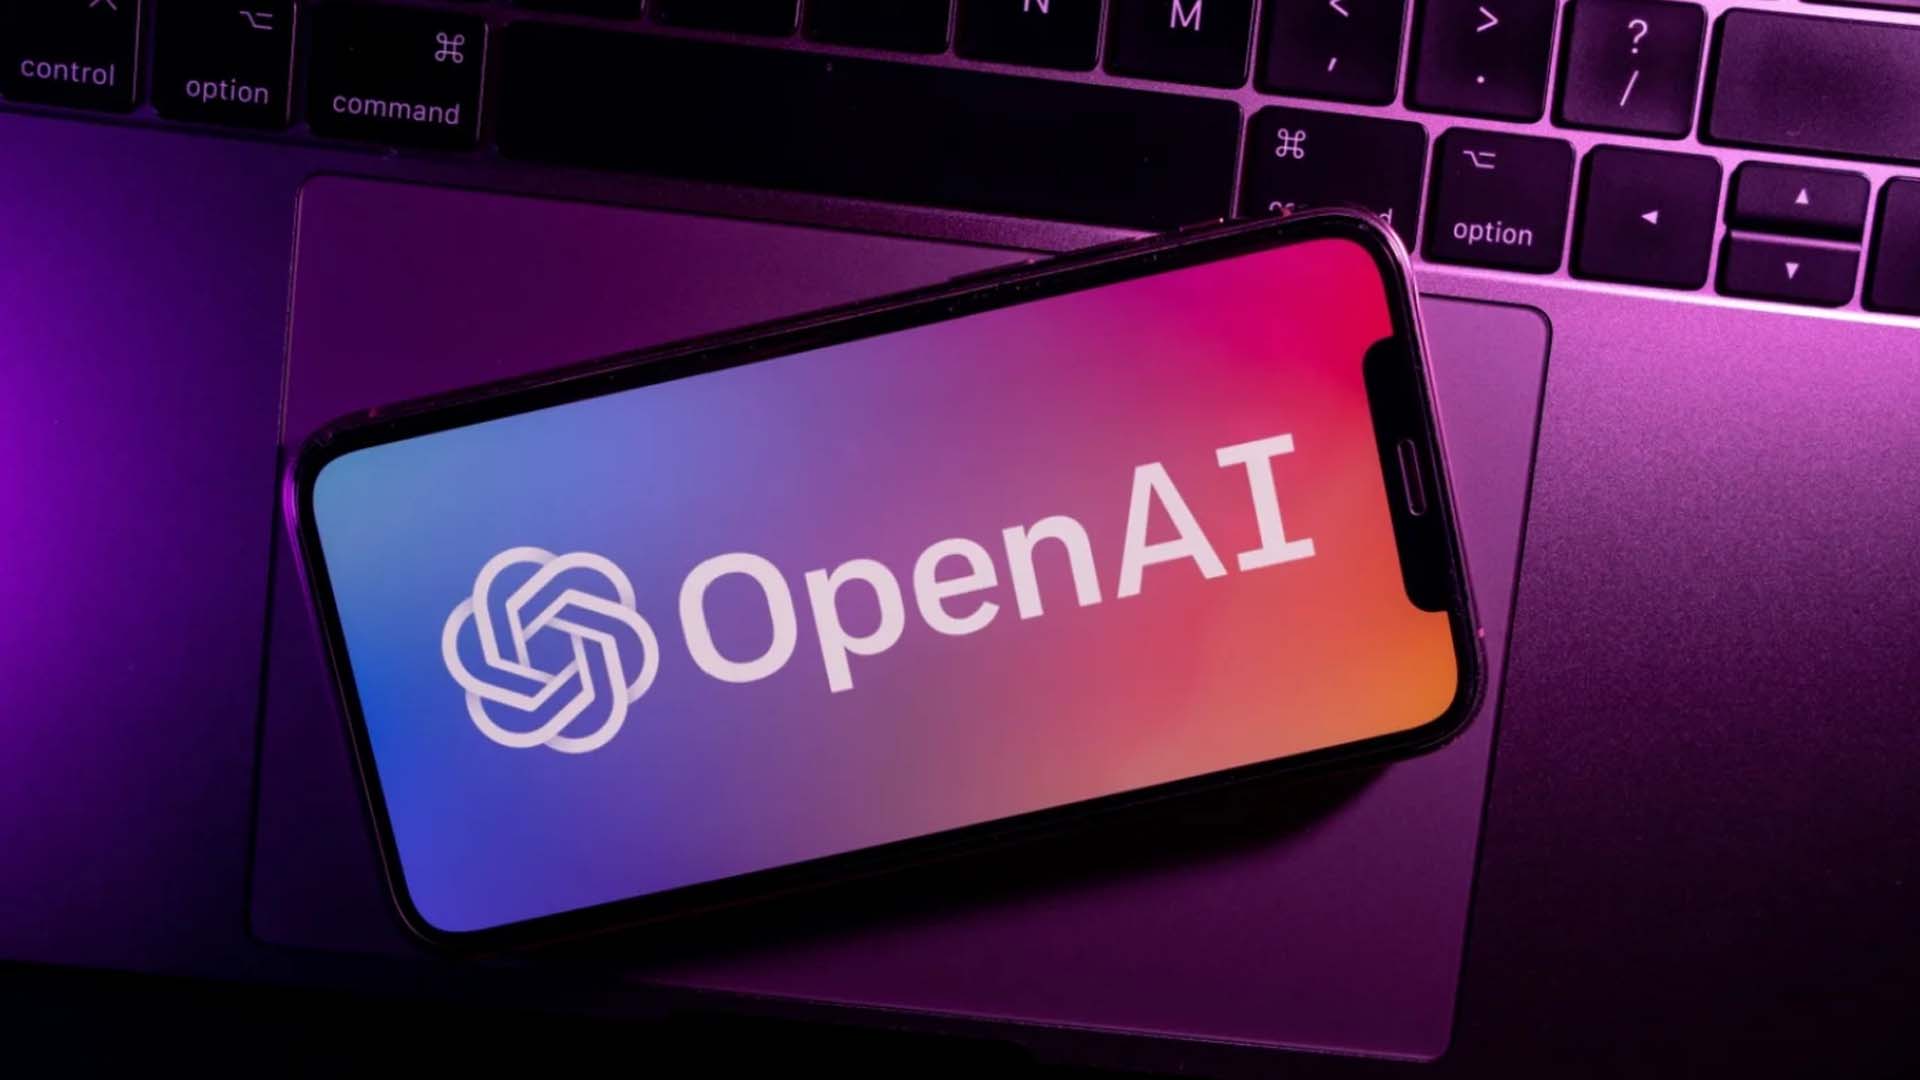 News Corp. content integrated into OpenAI AI tools in new pact